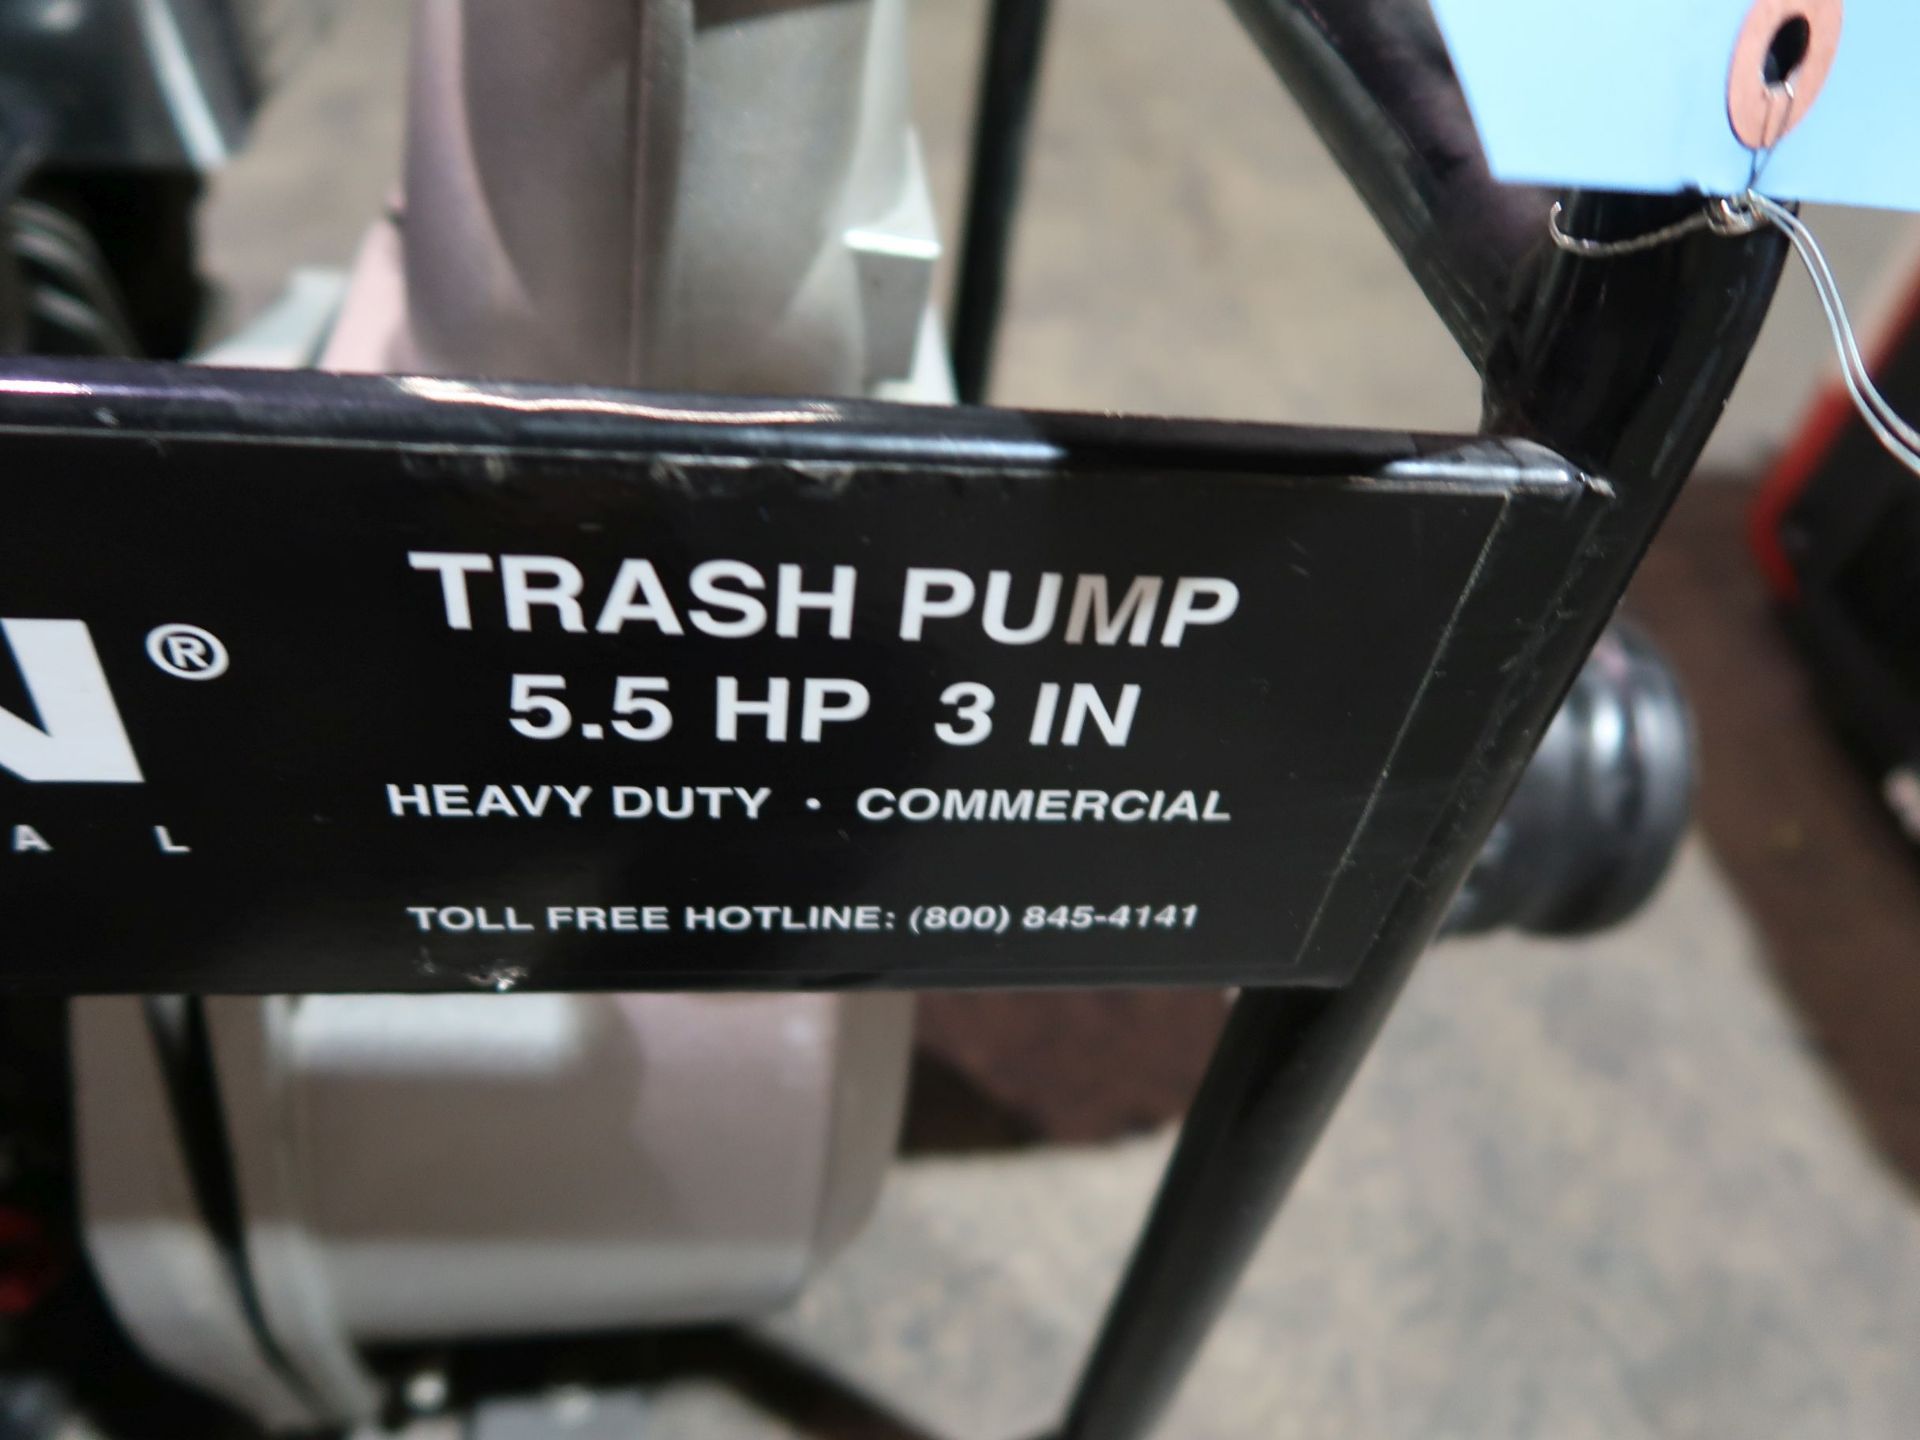 5.5 HP TITAN GAS POWERED COMMERCIAL TRASH PUMP - Image 3 of 3